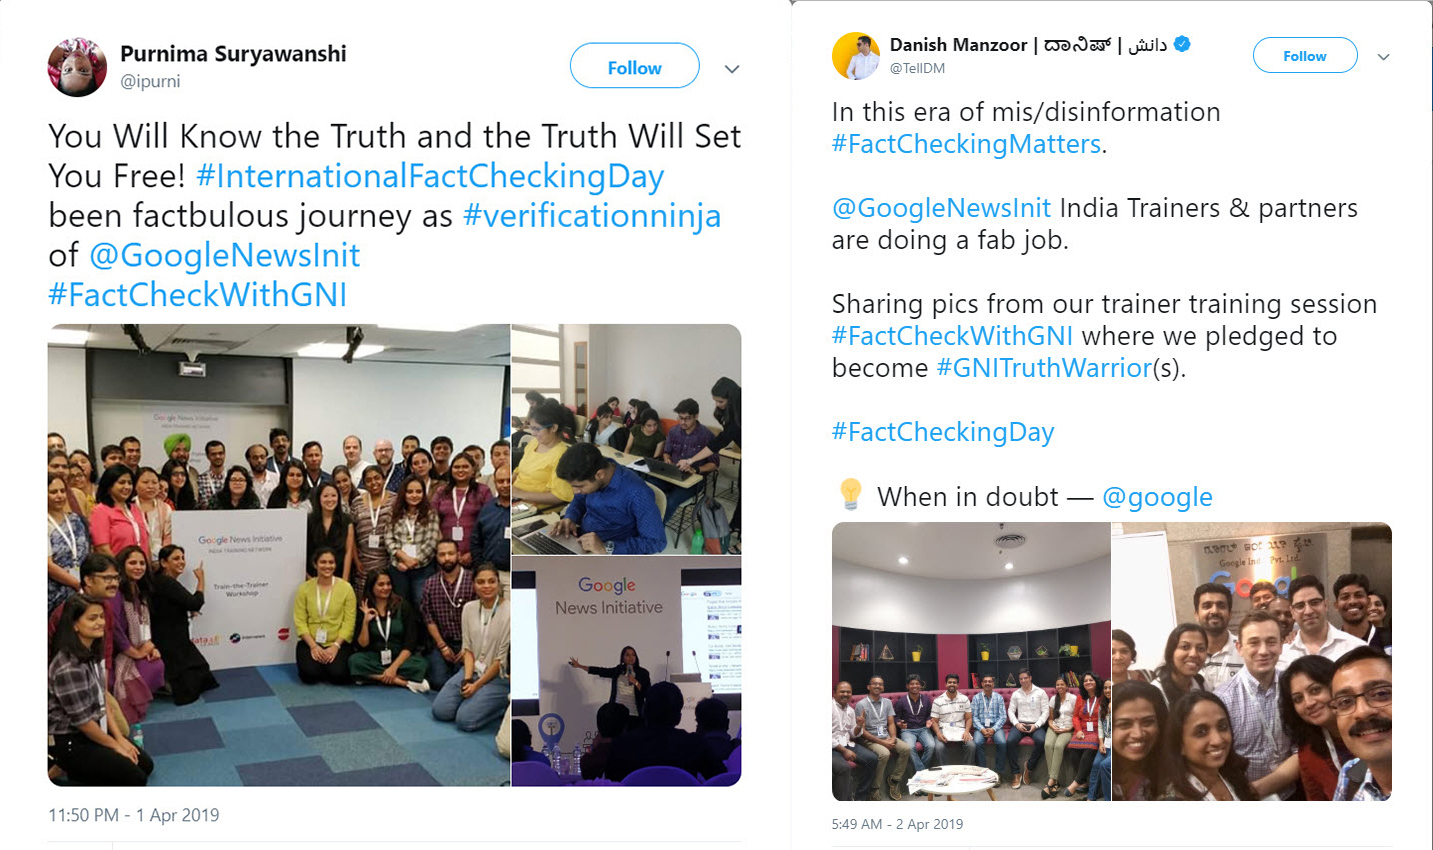 Tweet 1: You will know the truth and the truth will set you free! #InternationalFactCheckDay been factbulous journey as #verificationninja of (at)GoogleNewsInit #FactCheckWithGNI. Tweet 2: In this era of mis/disinformation #FactCheckingMatters. (at)GoogleNewsInit India Trainers & partners are doing a fab job. Sharing pics from our trainer training session #FactCheckWithGNI where we pledged to become #GNITruthWarrior(s) #FactCheckingDay. When in doubt - google